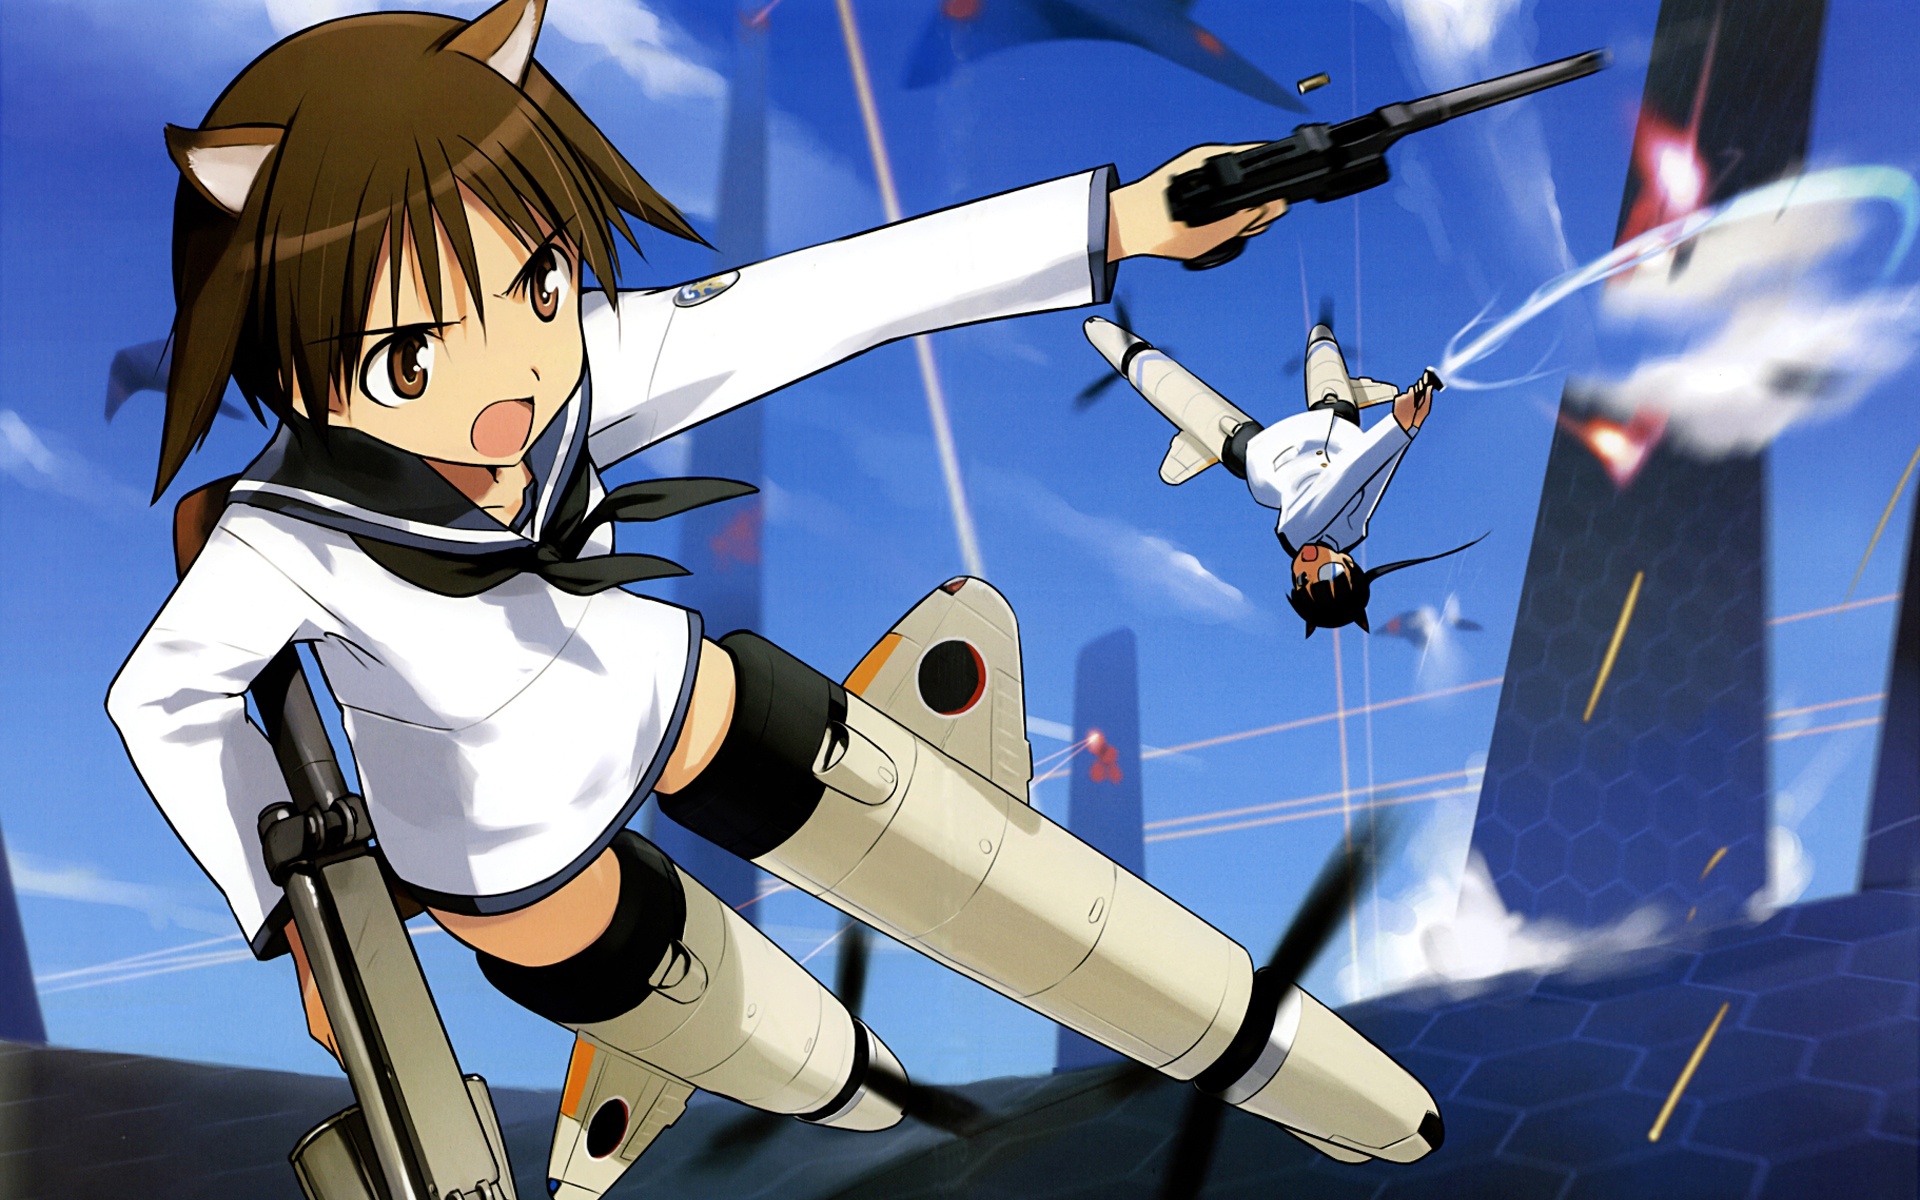 Strike Witches: The Movie #15